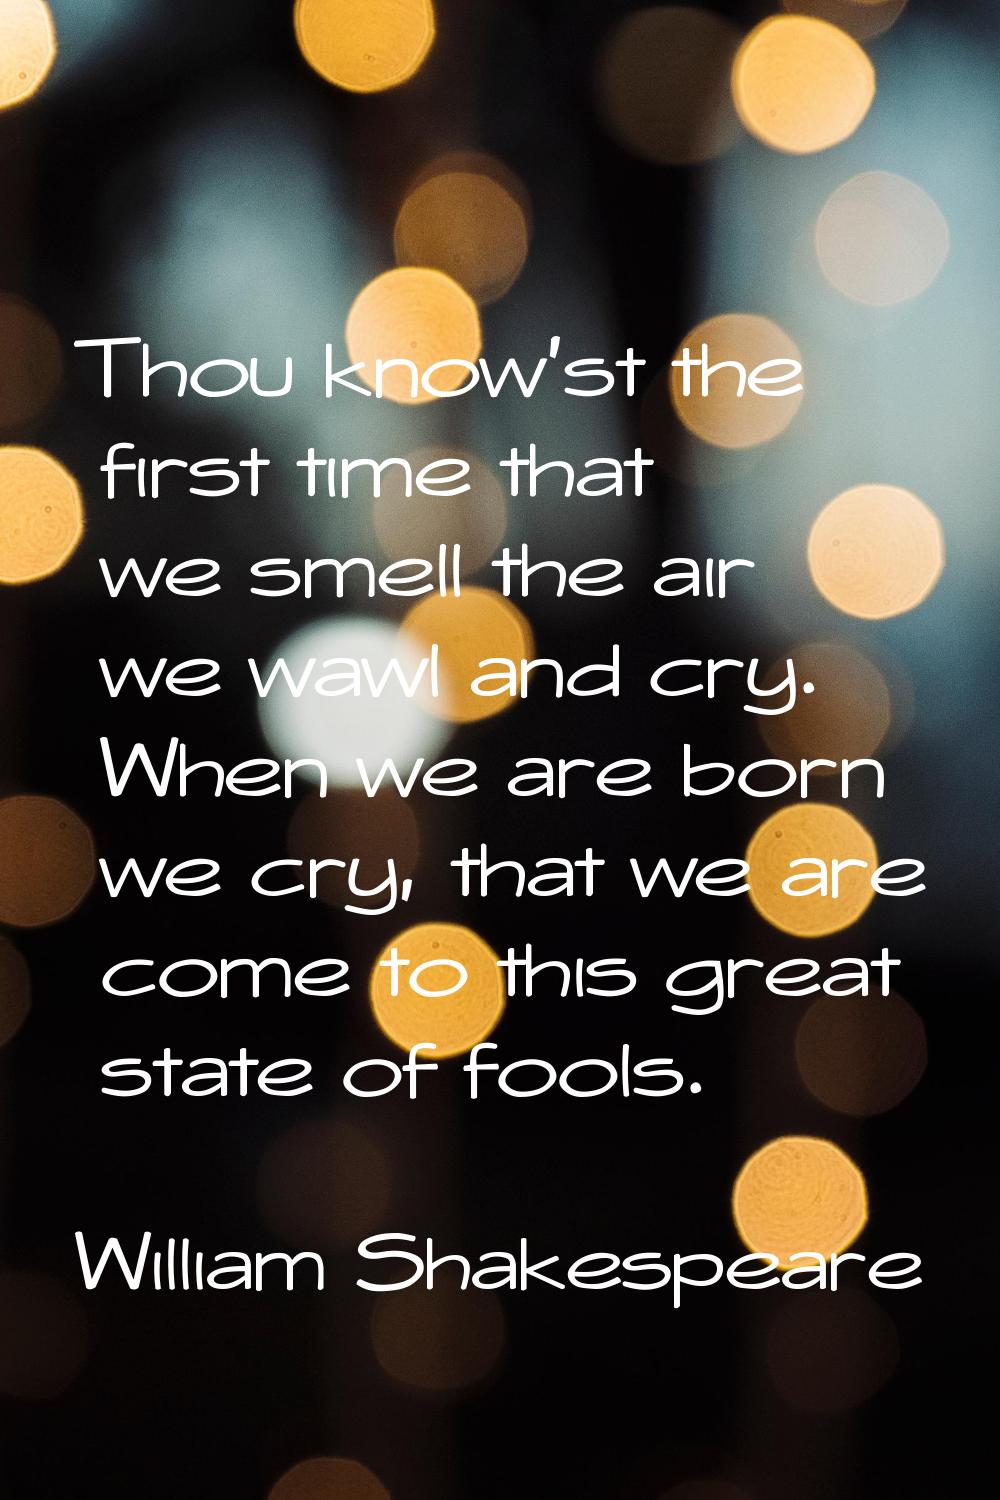 Thou know'st the first time that we smell the air we wawl and cry. When we are born we cry, that we